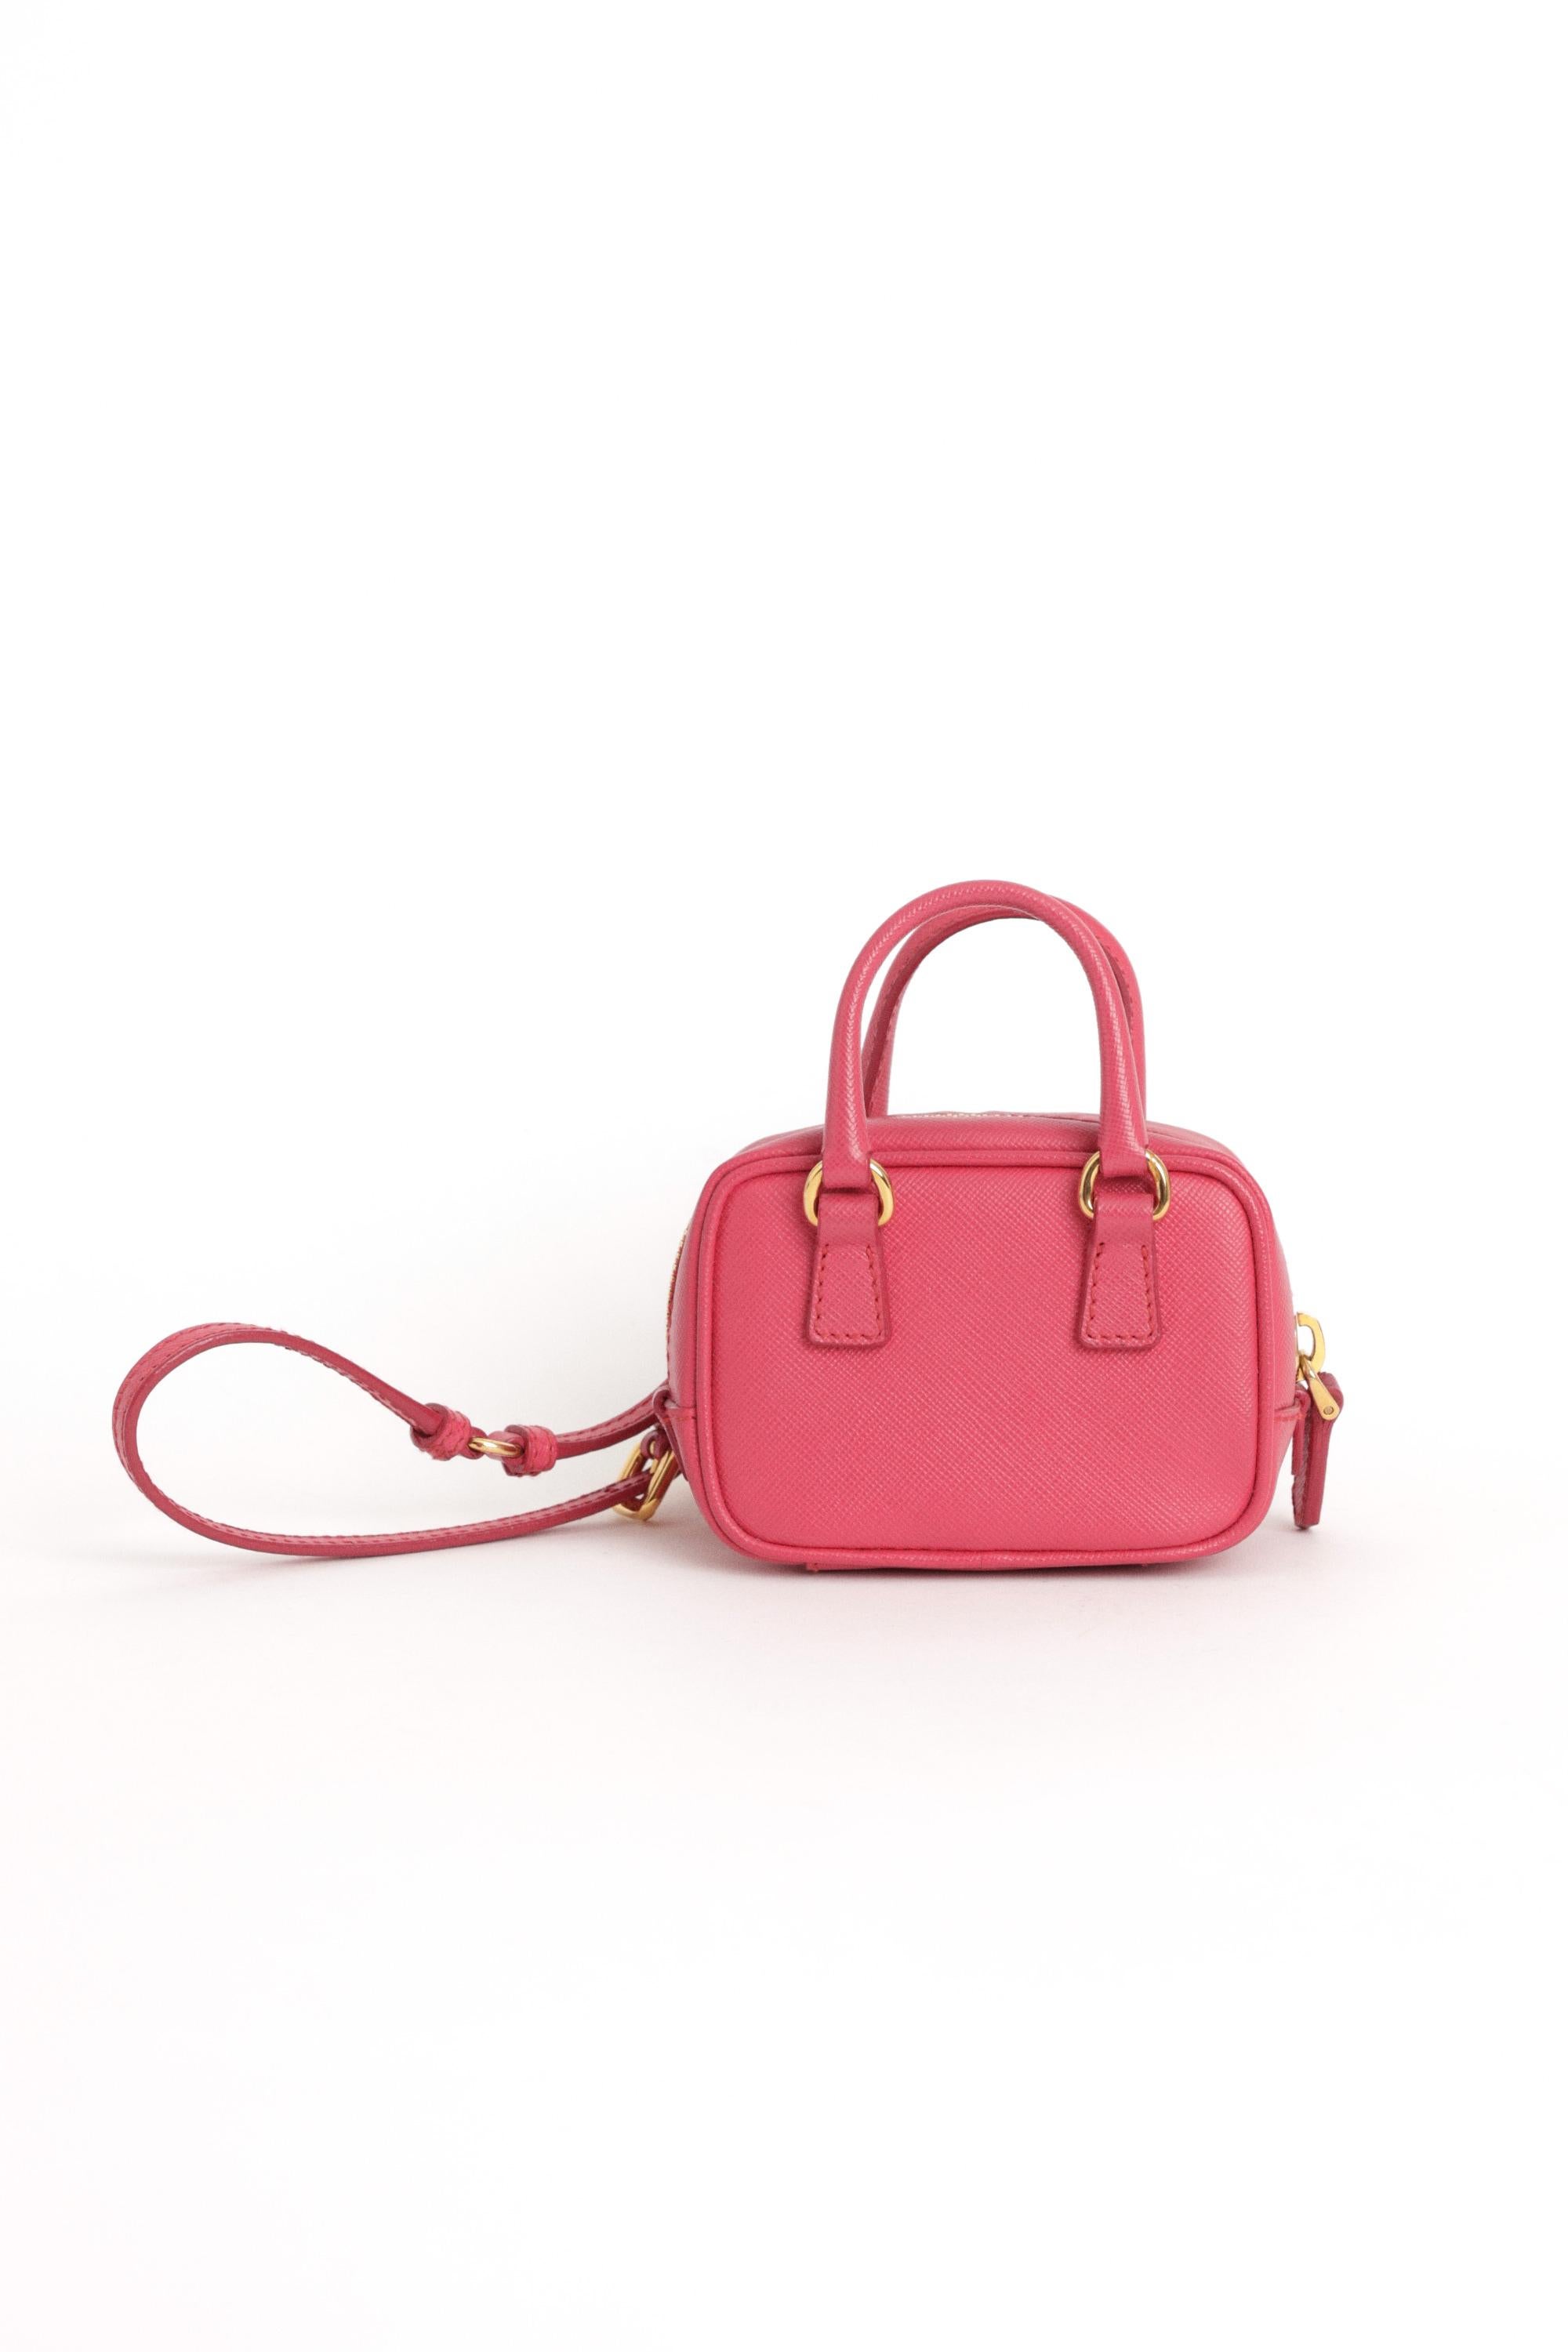 We are excited to present this Prada 2010’s mini Tamaris bag. Features a hand strap, zip closure and removable cat keychain. Pre-loved, in excellent vintage condition. Please note, there is a small mark on the front - not noticeable.

Colour: Pink,